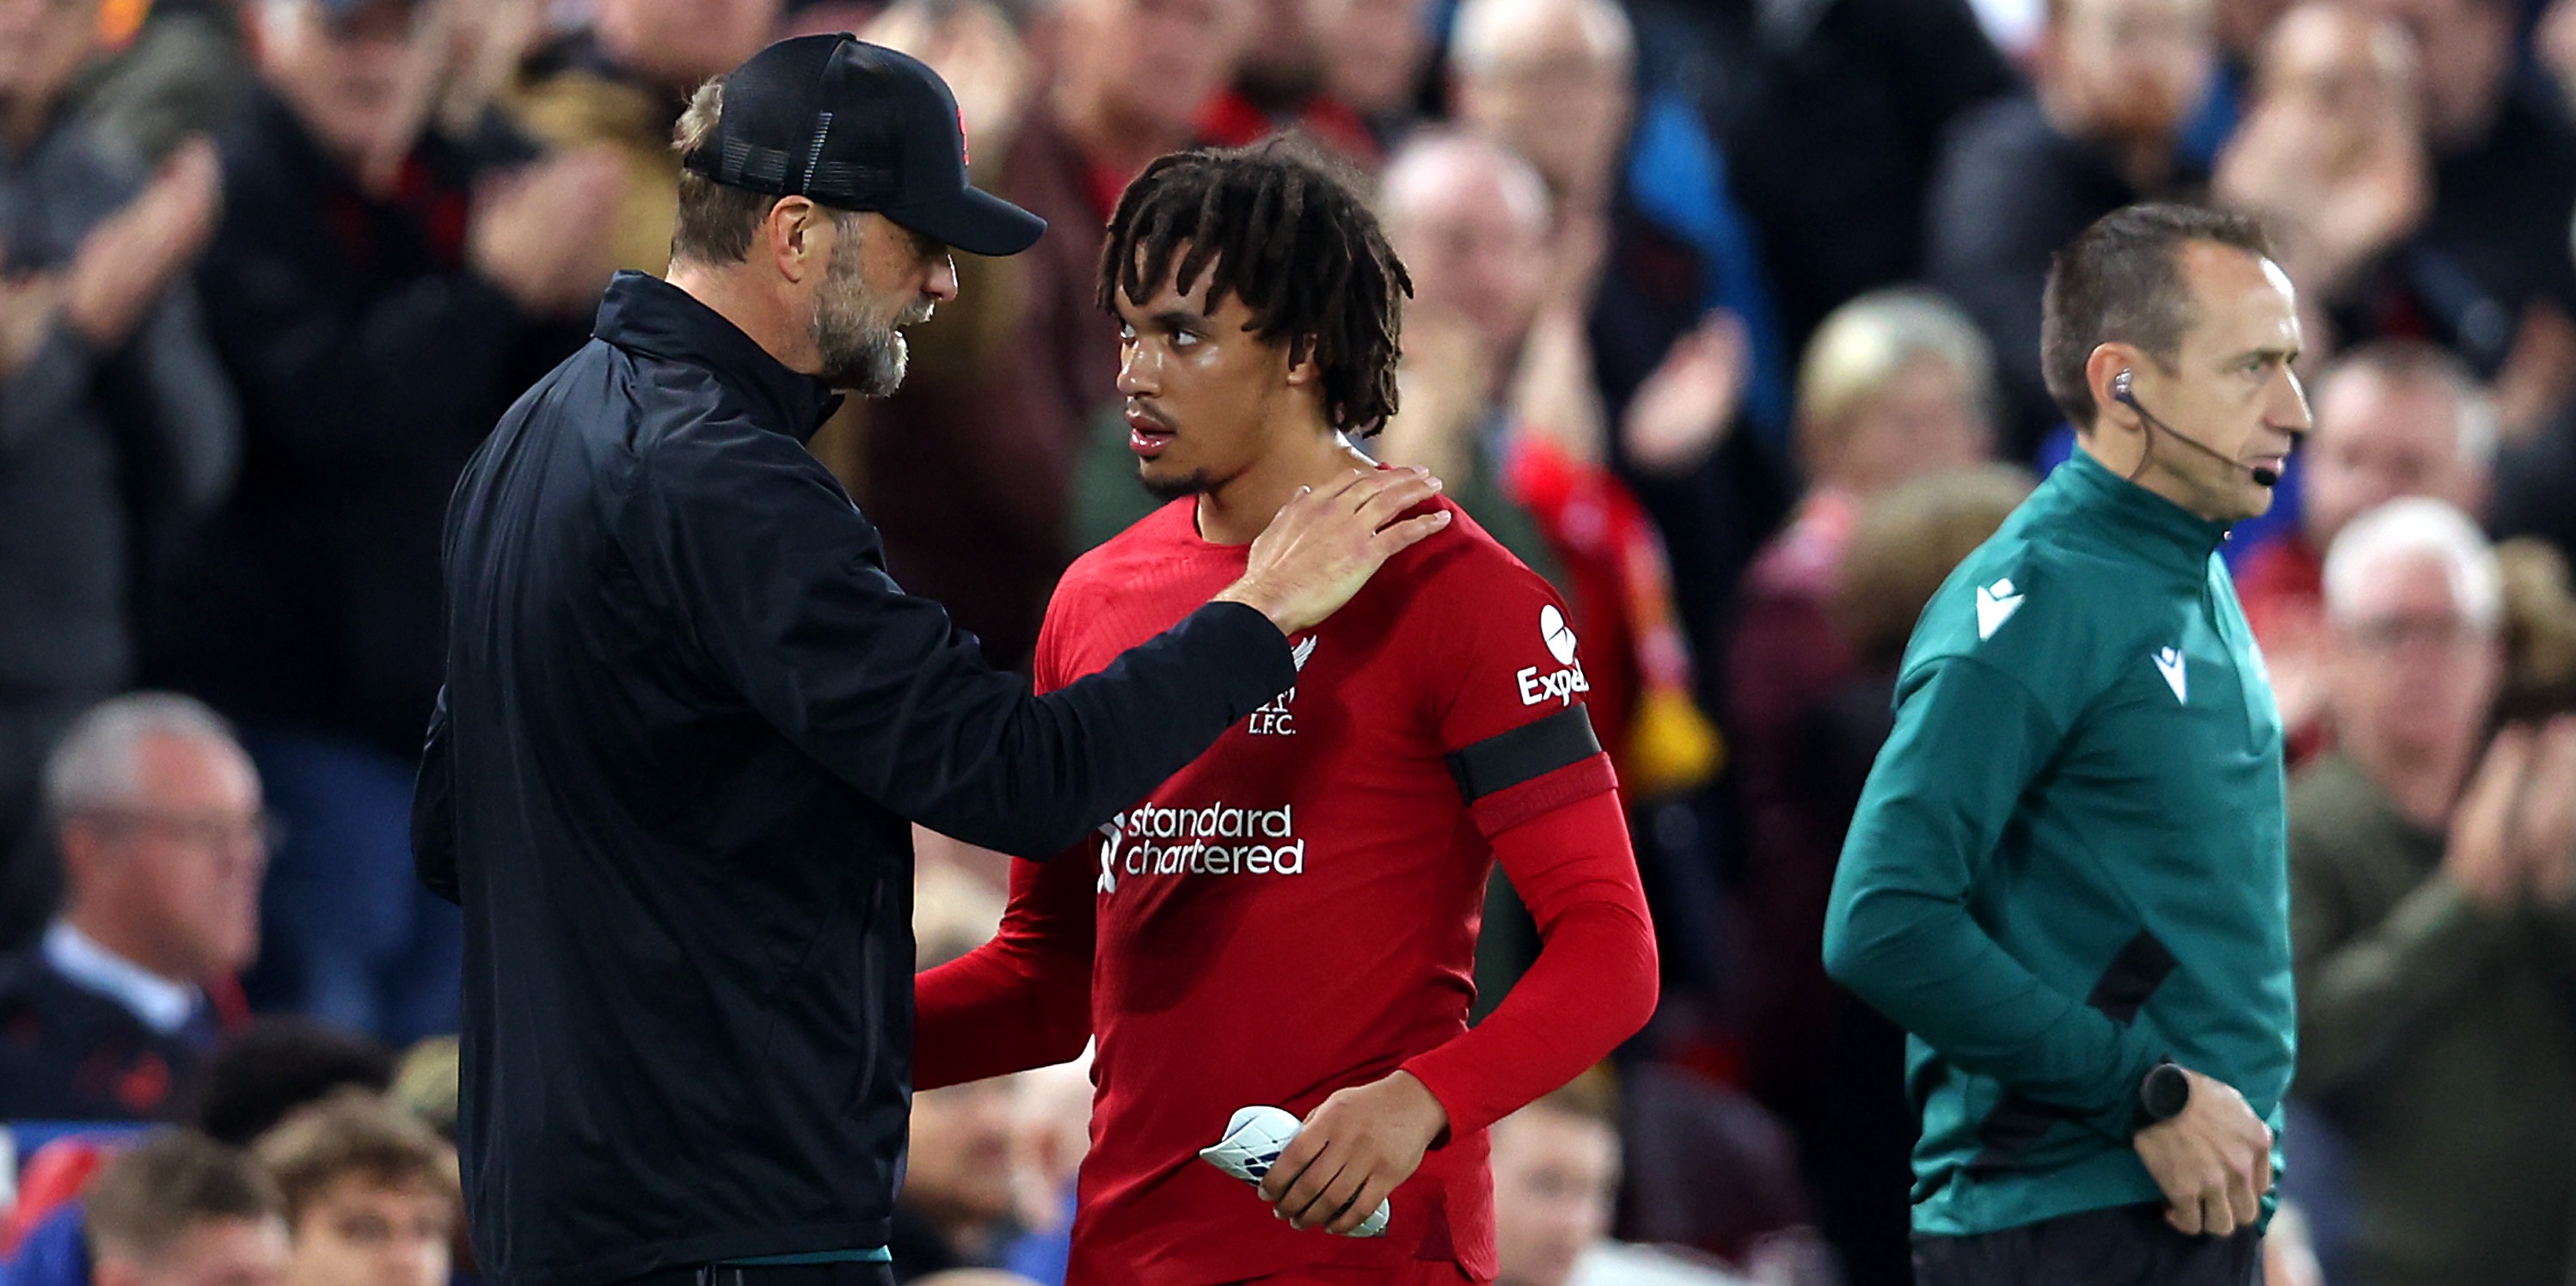 ‘Something’s not going right’ – Alexander-Arnold provides honest assessment of Liverpool’s current situation